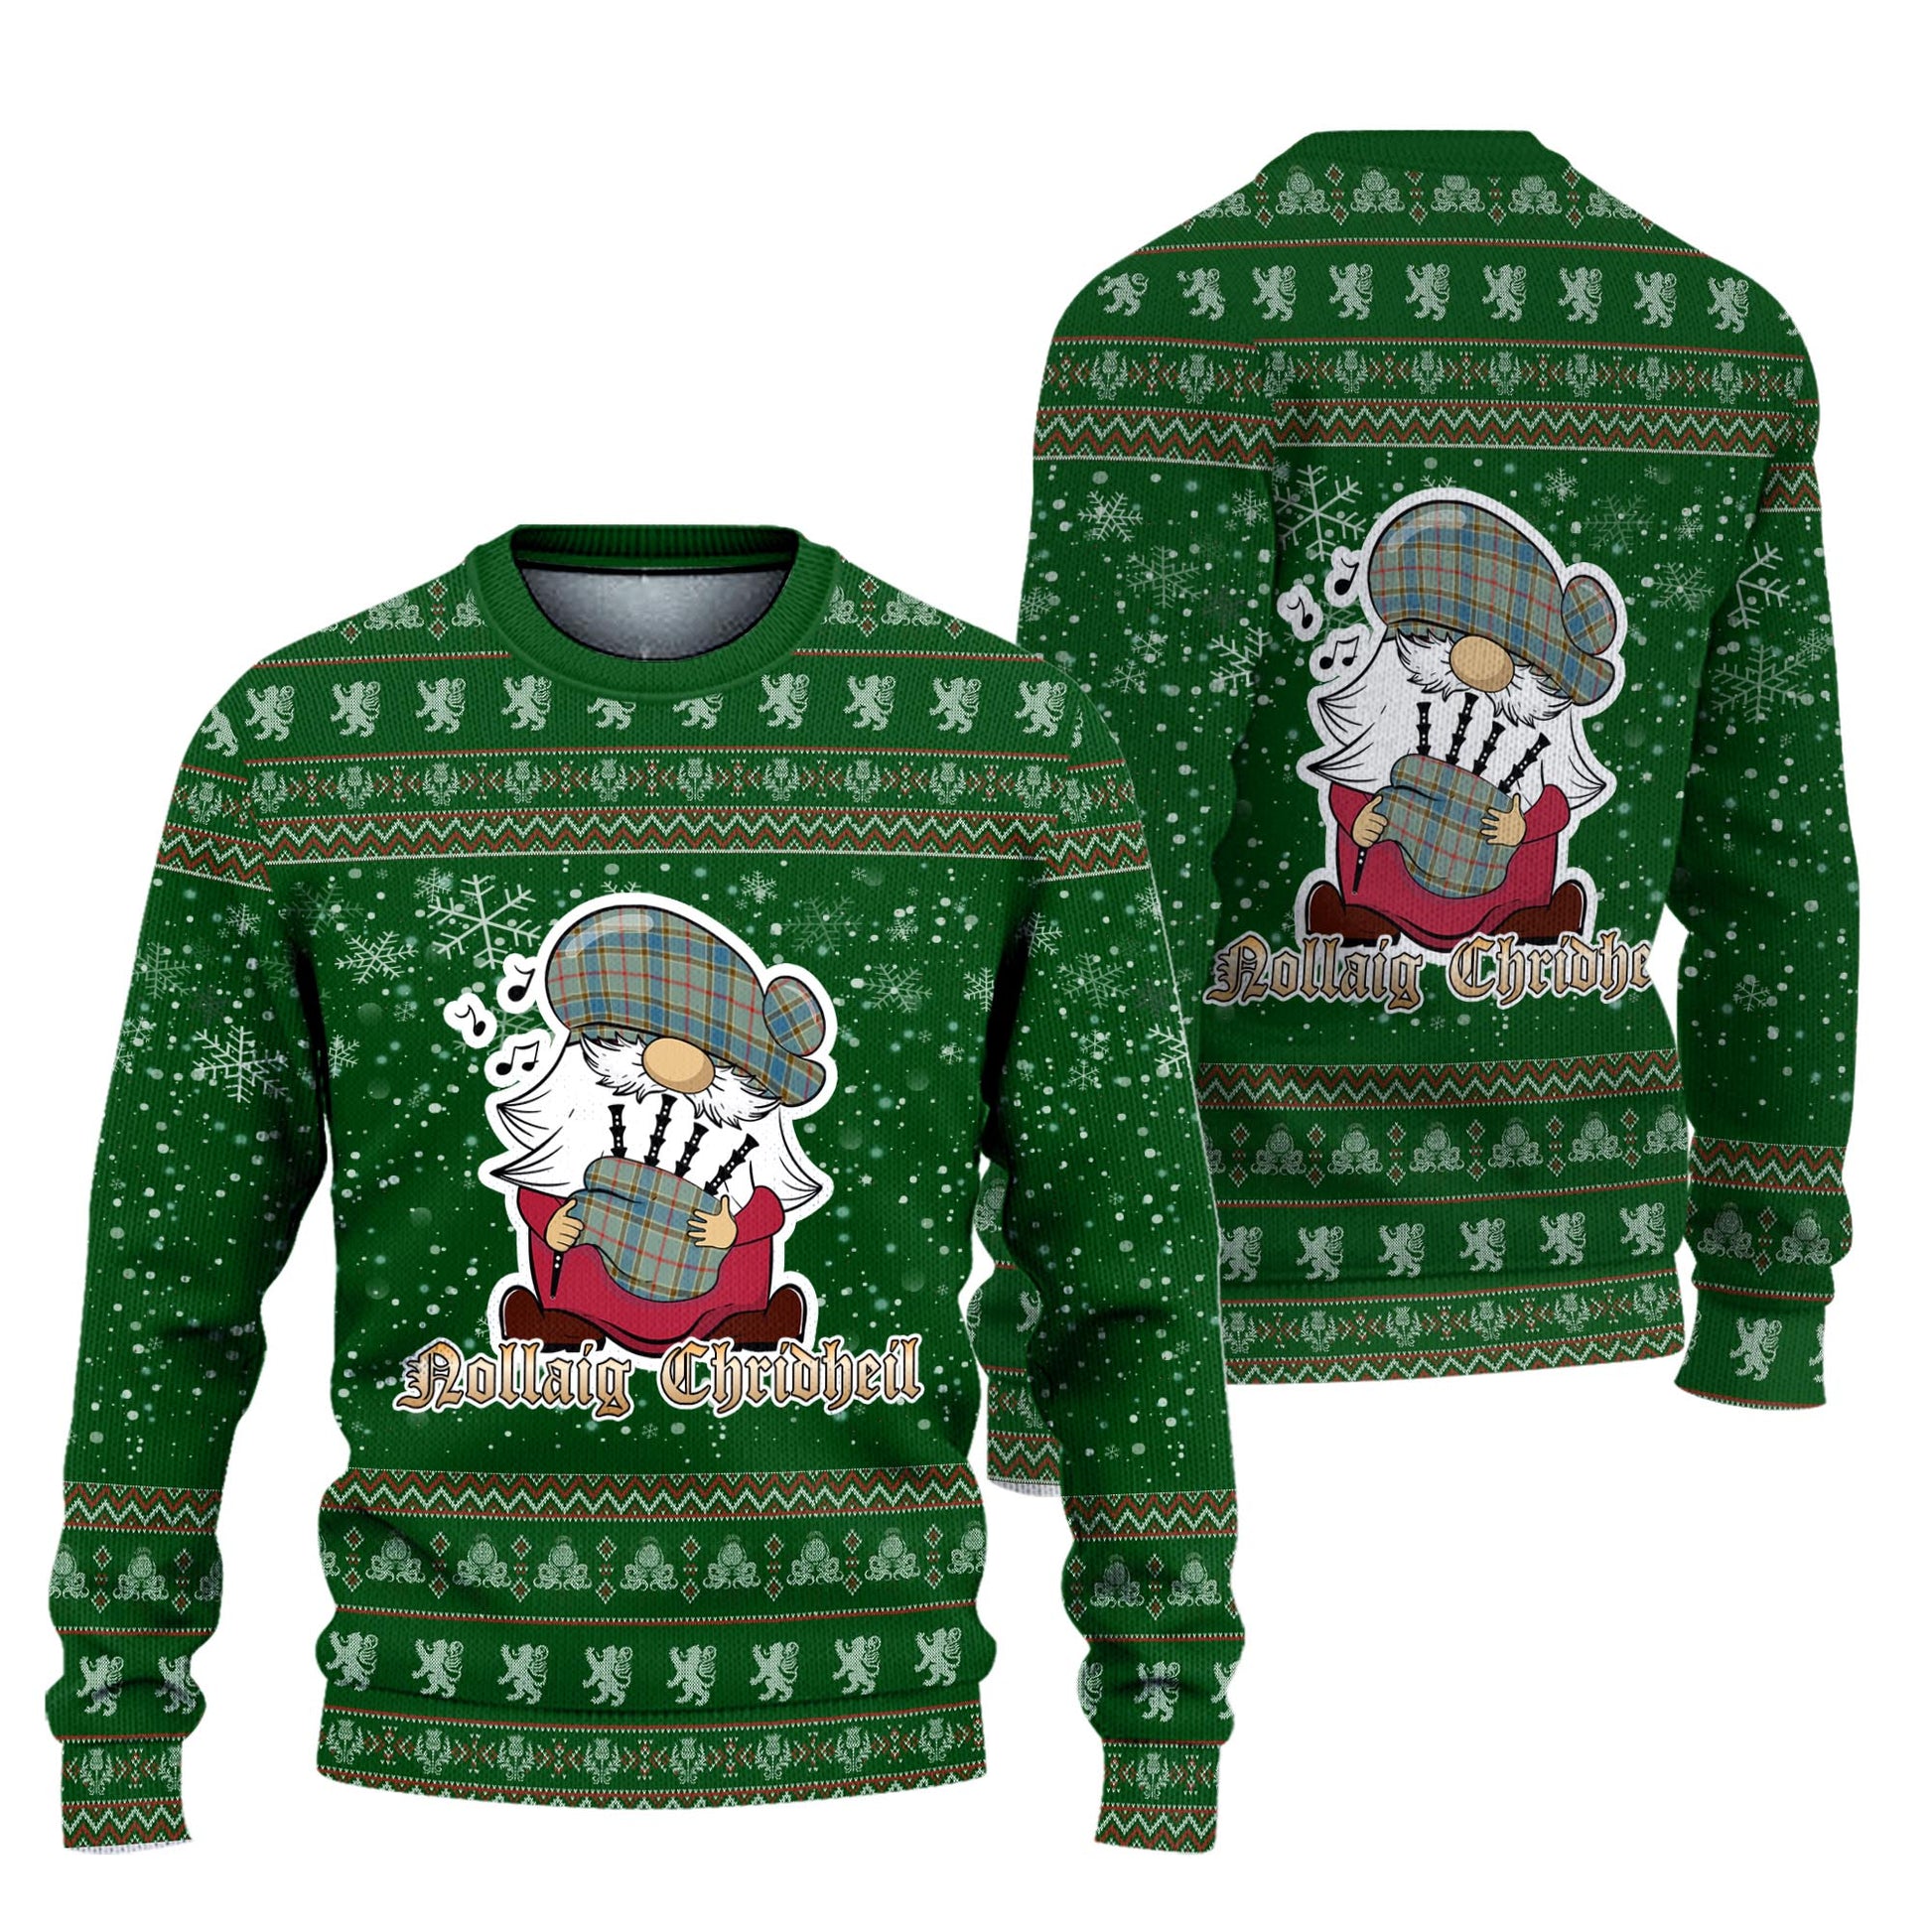 Balfour Blue Clan Christmas Family Knitted Sweater with Funny Gnome Playing Bagpipes Unisex Green - Tartanvibesclothing